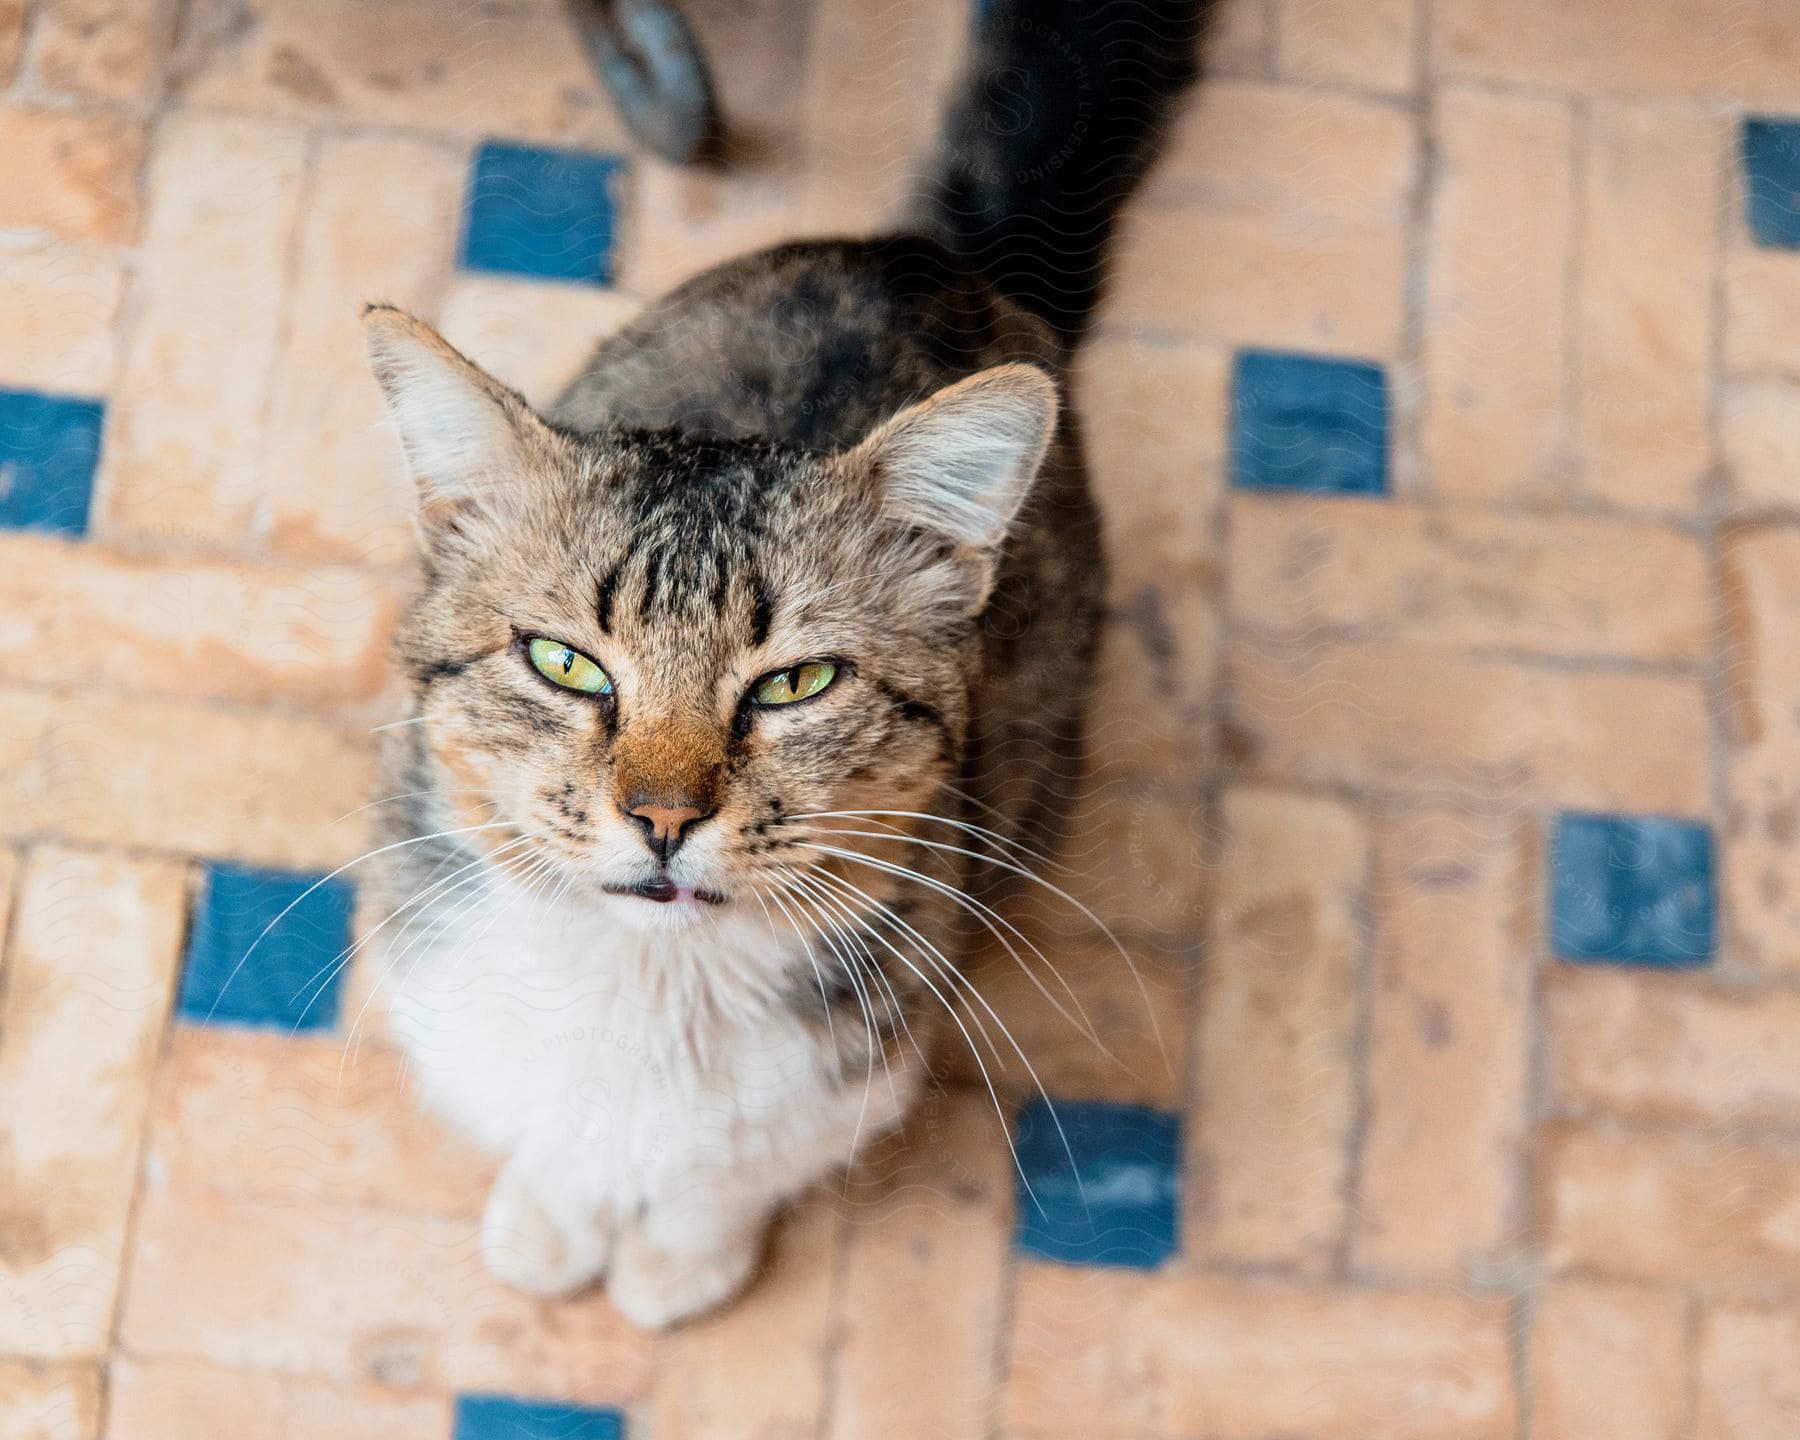 Tabby cat with green eyes looking up, standing on a tiled floor with blue squares.